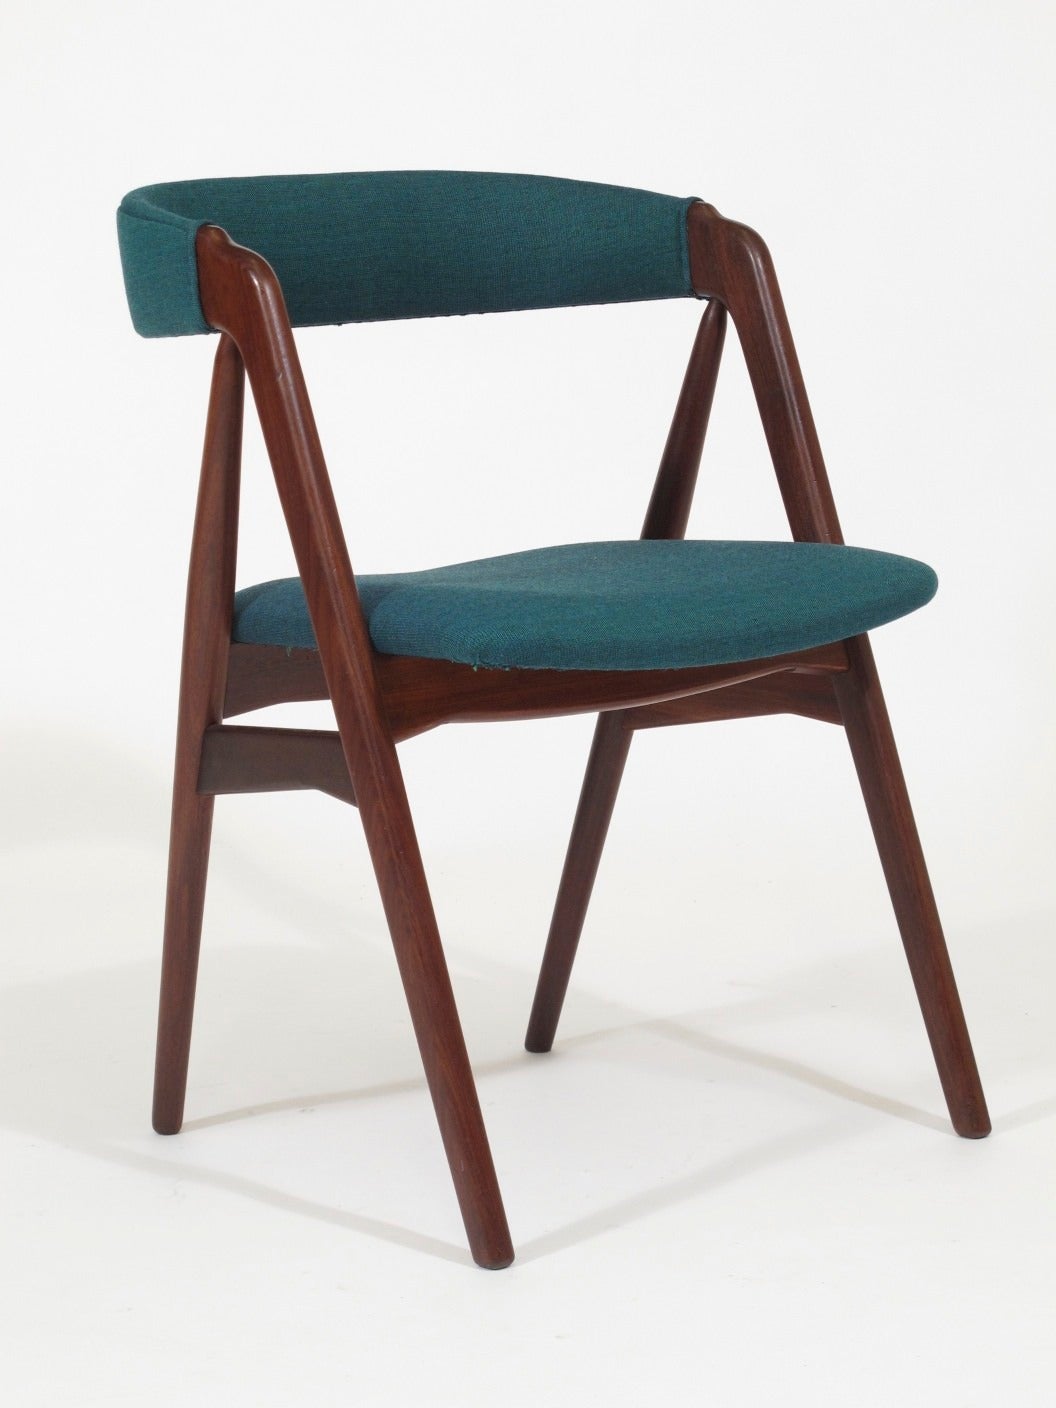 Six Mid-century walnut dining chairs in manner of Kai Kristiansen. Curved backs on A-frame with cross stretchers under seat for support. Newly upholstered in teal fabric.  Additional chairs available to create set/8+